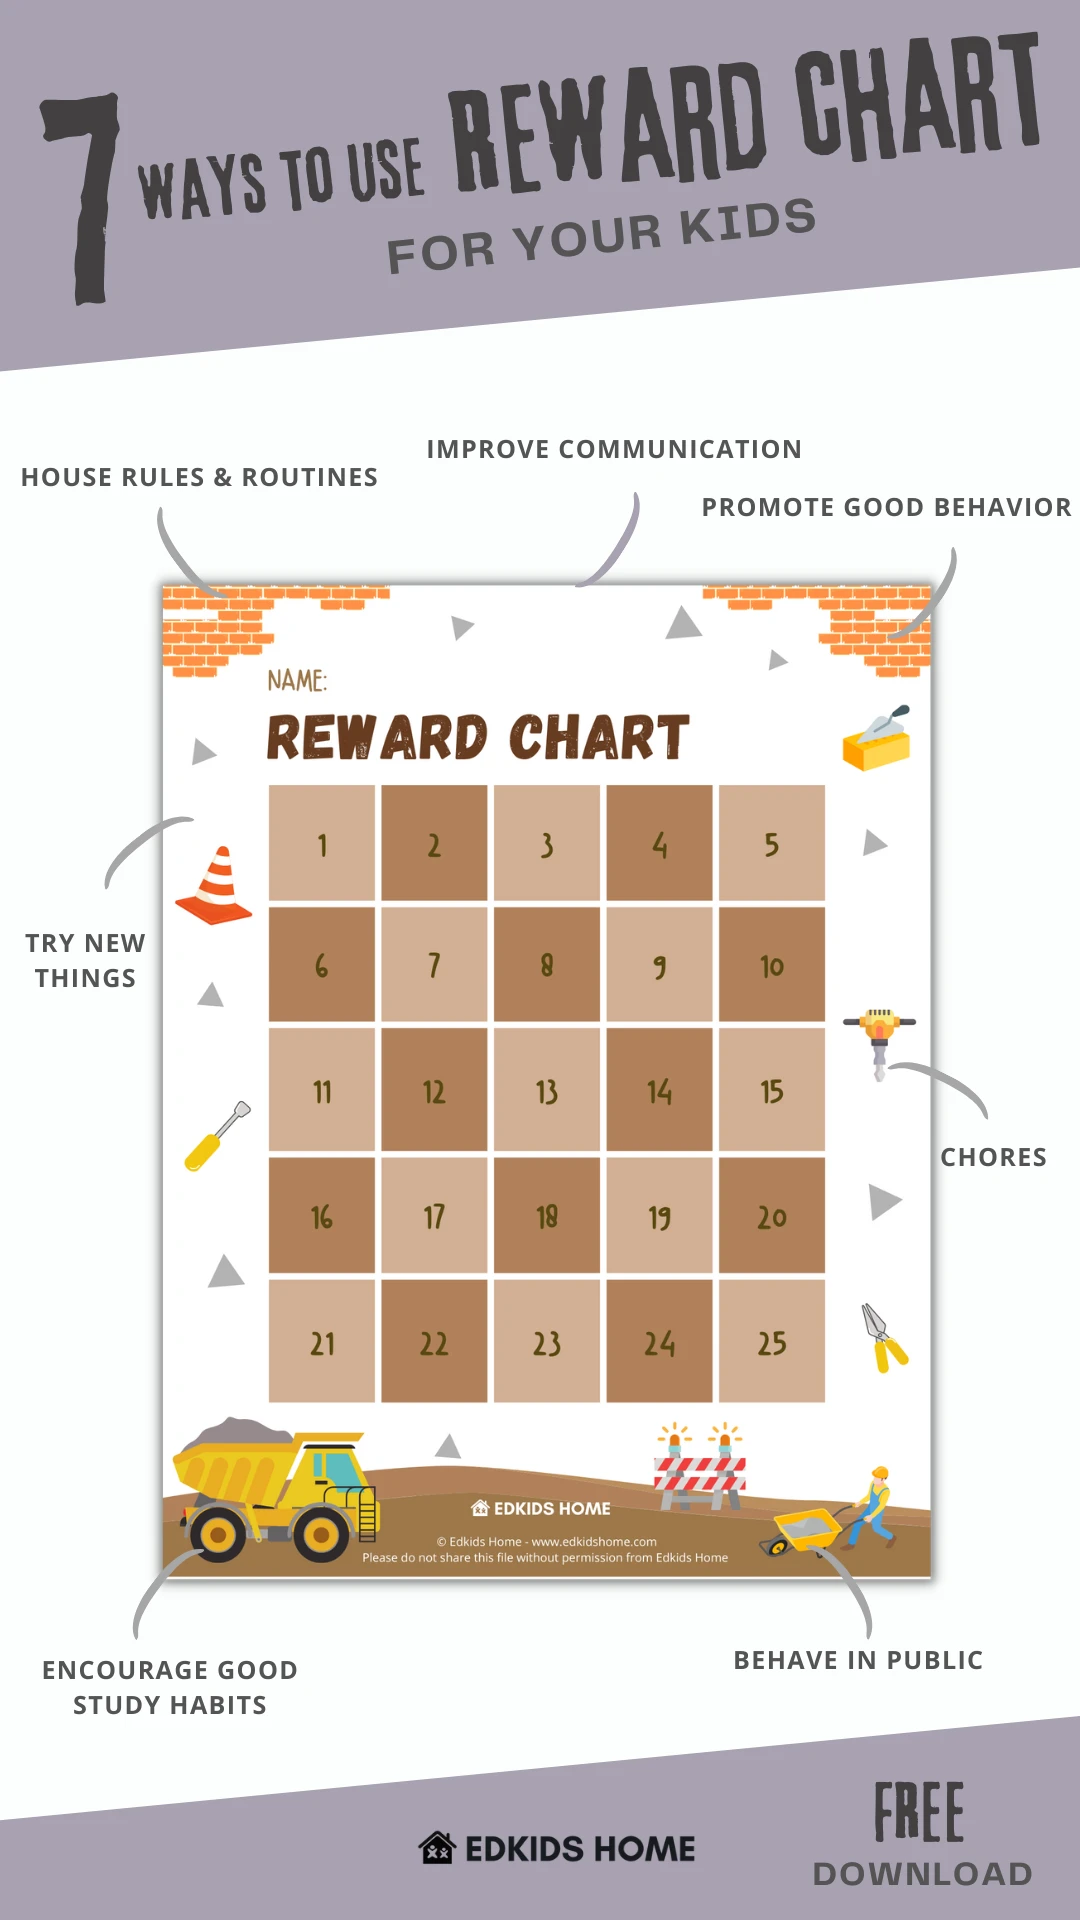 7 ways to use reward chart for your kids